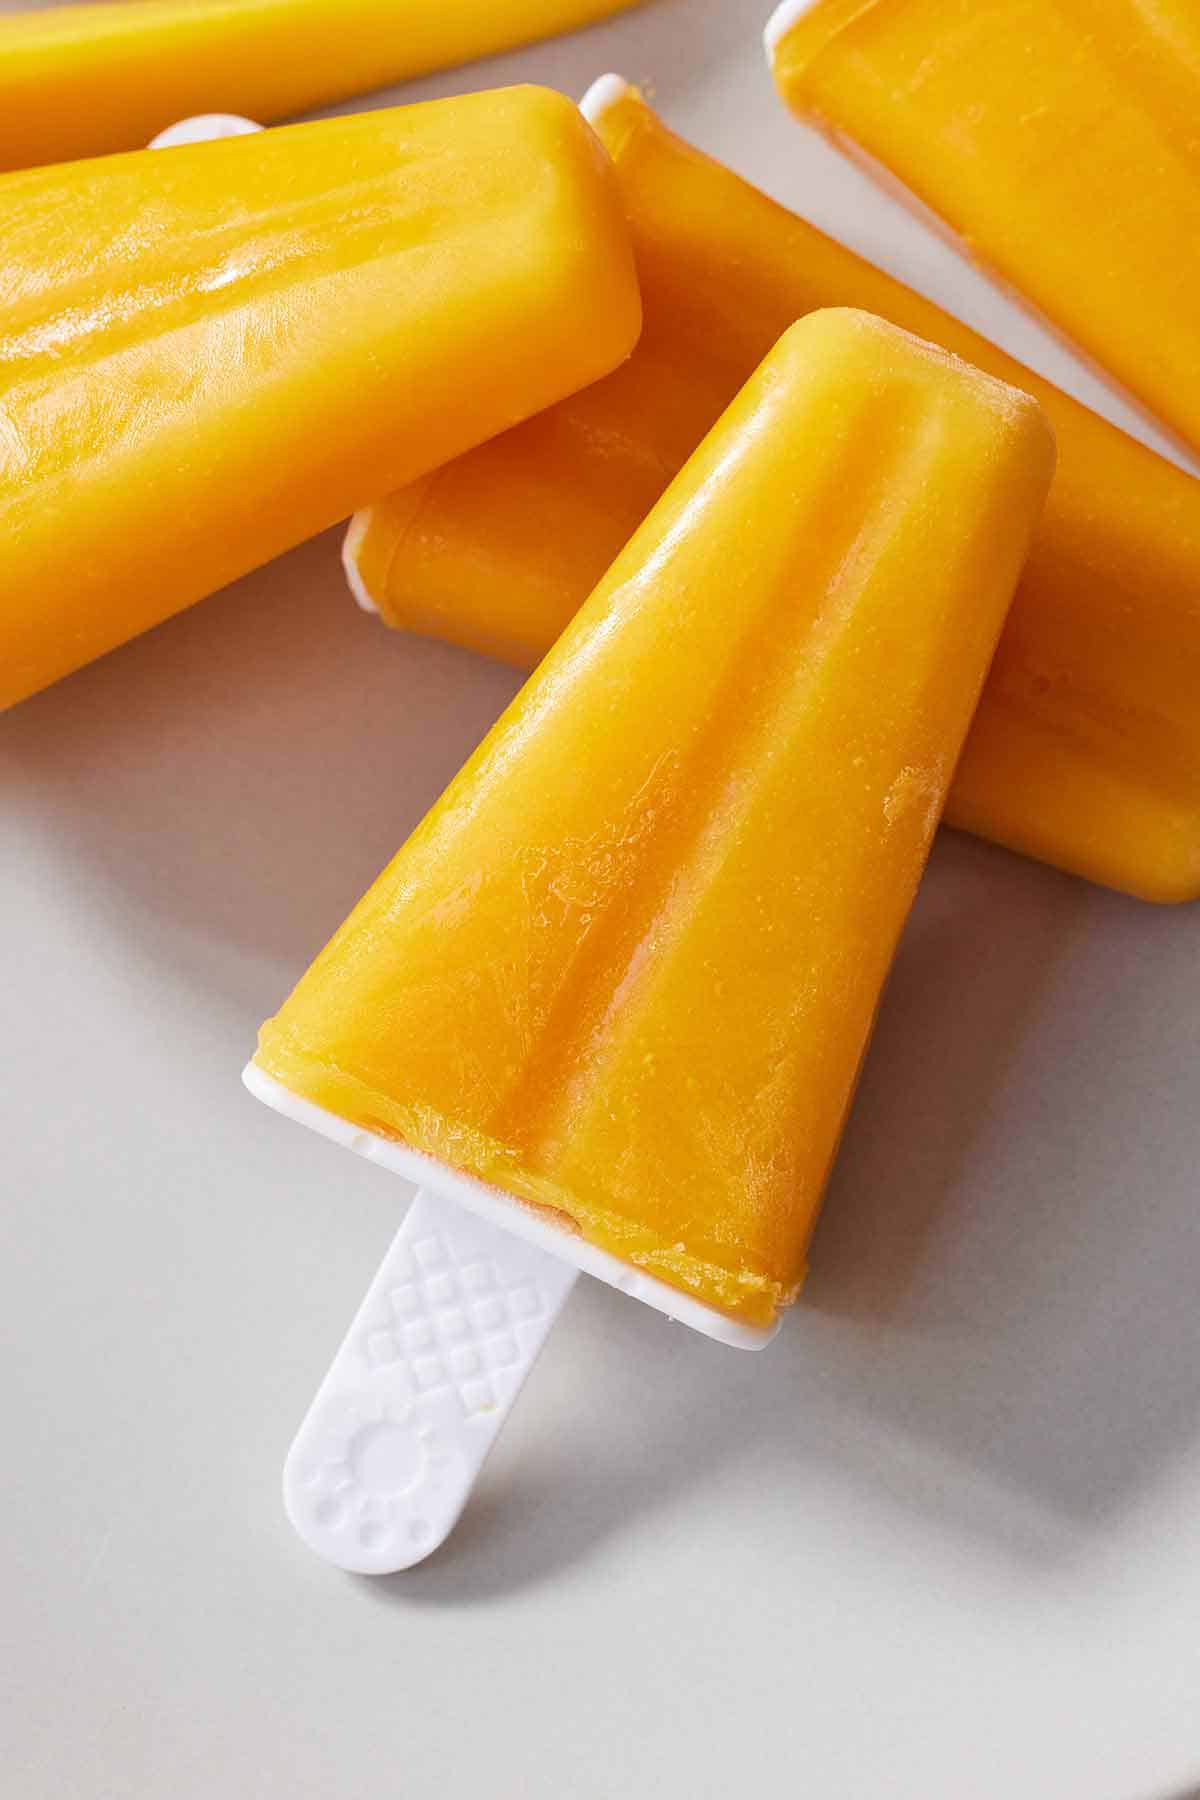 A mango popsicle leaning against other popsicles.